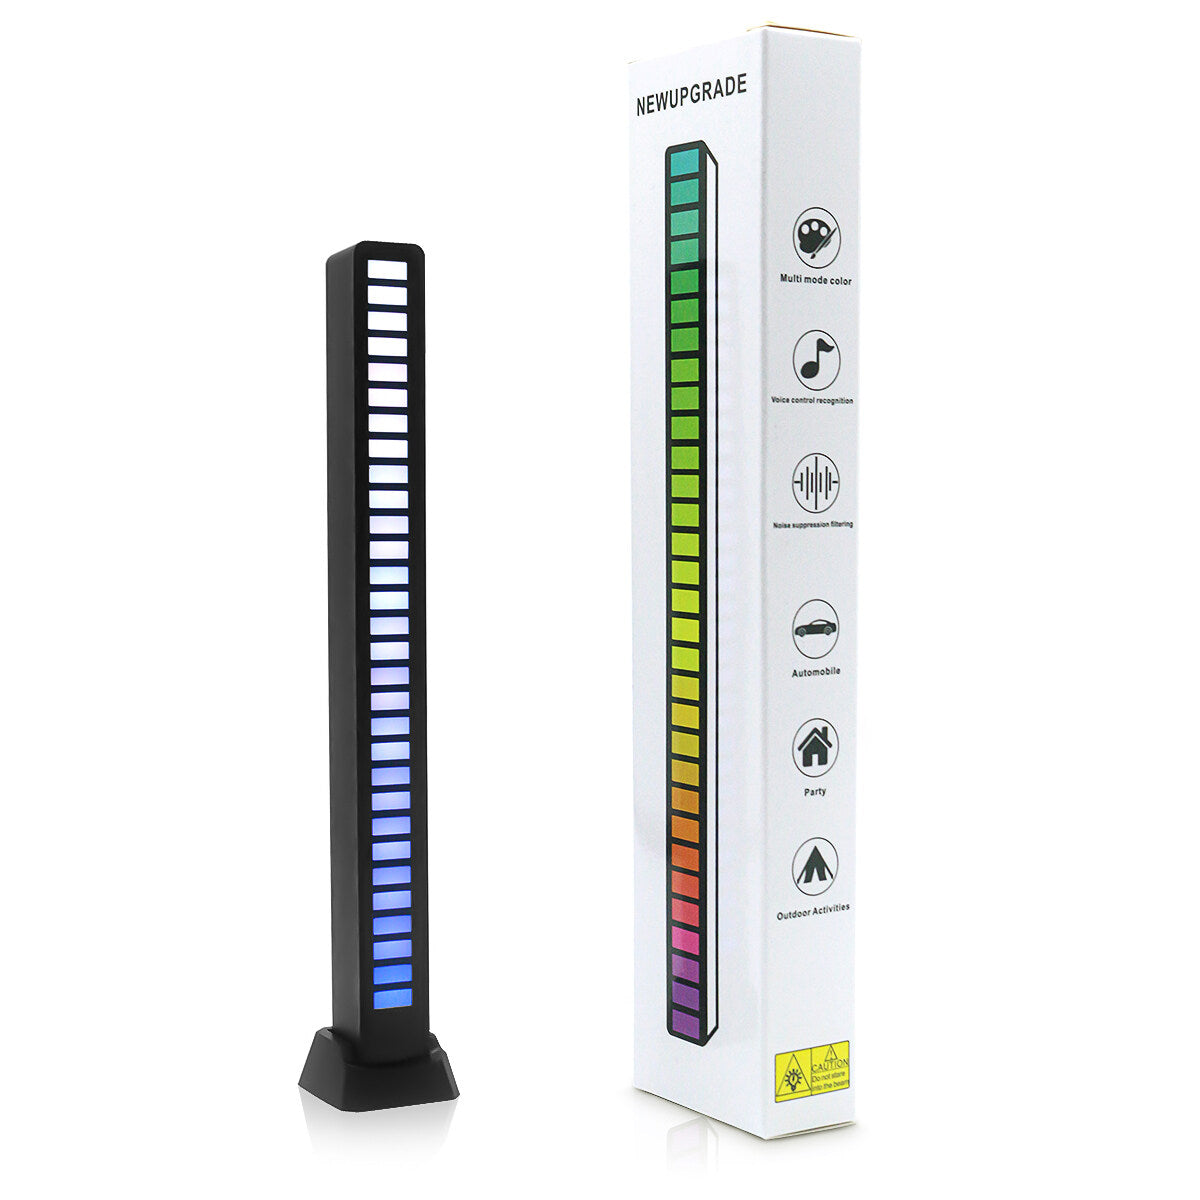 RGB Music Sound Control LED Strip Light Bluetooth App Pickup Voice Activated Rhythm Ambient Bar Lamp For Night TV Computer